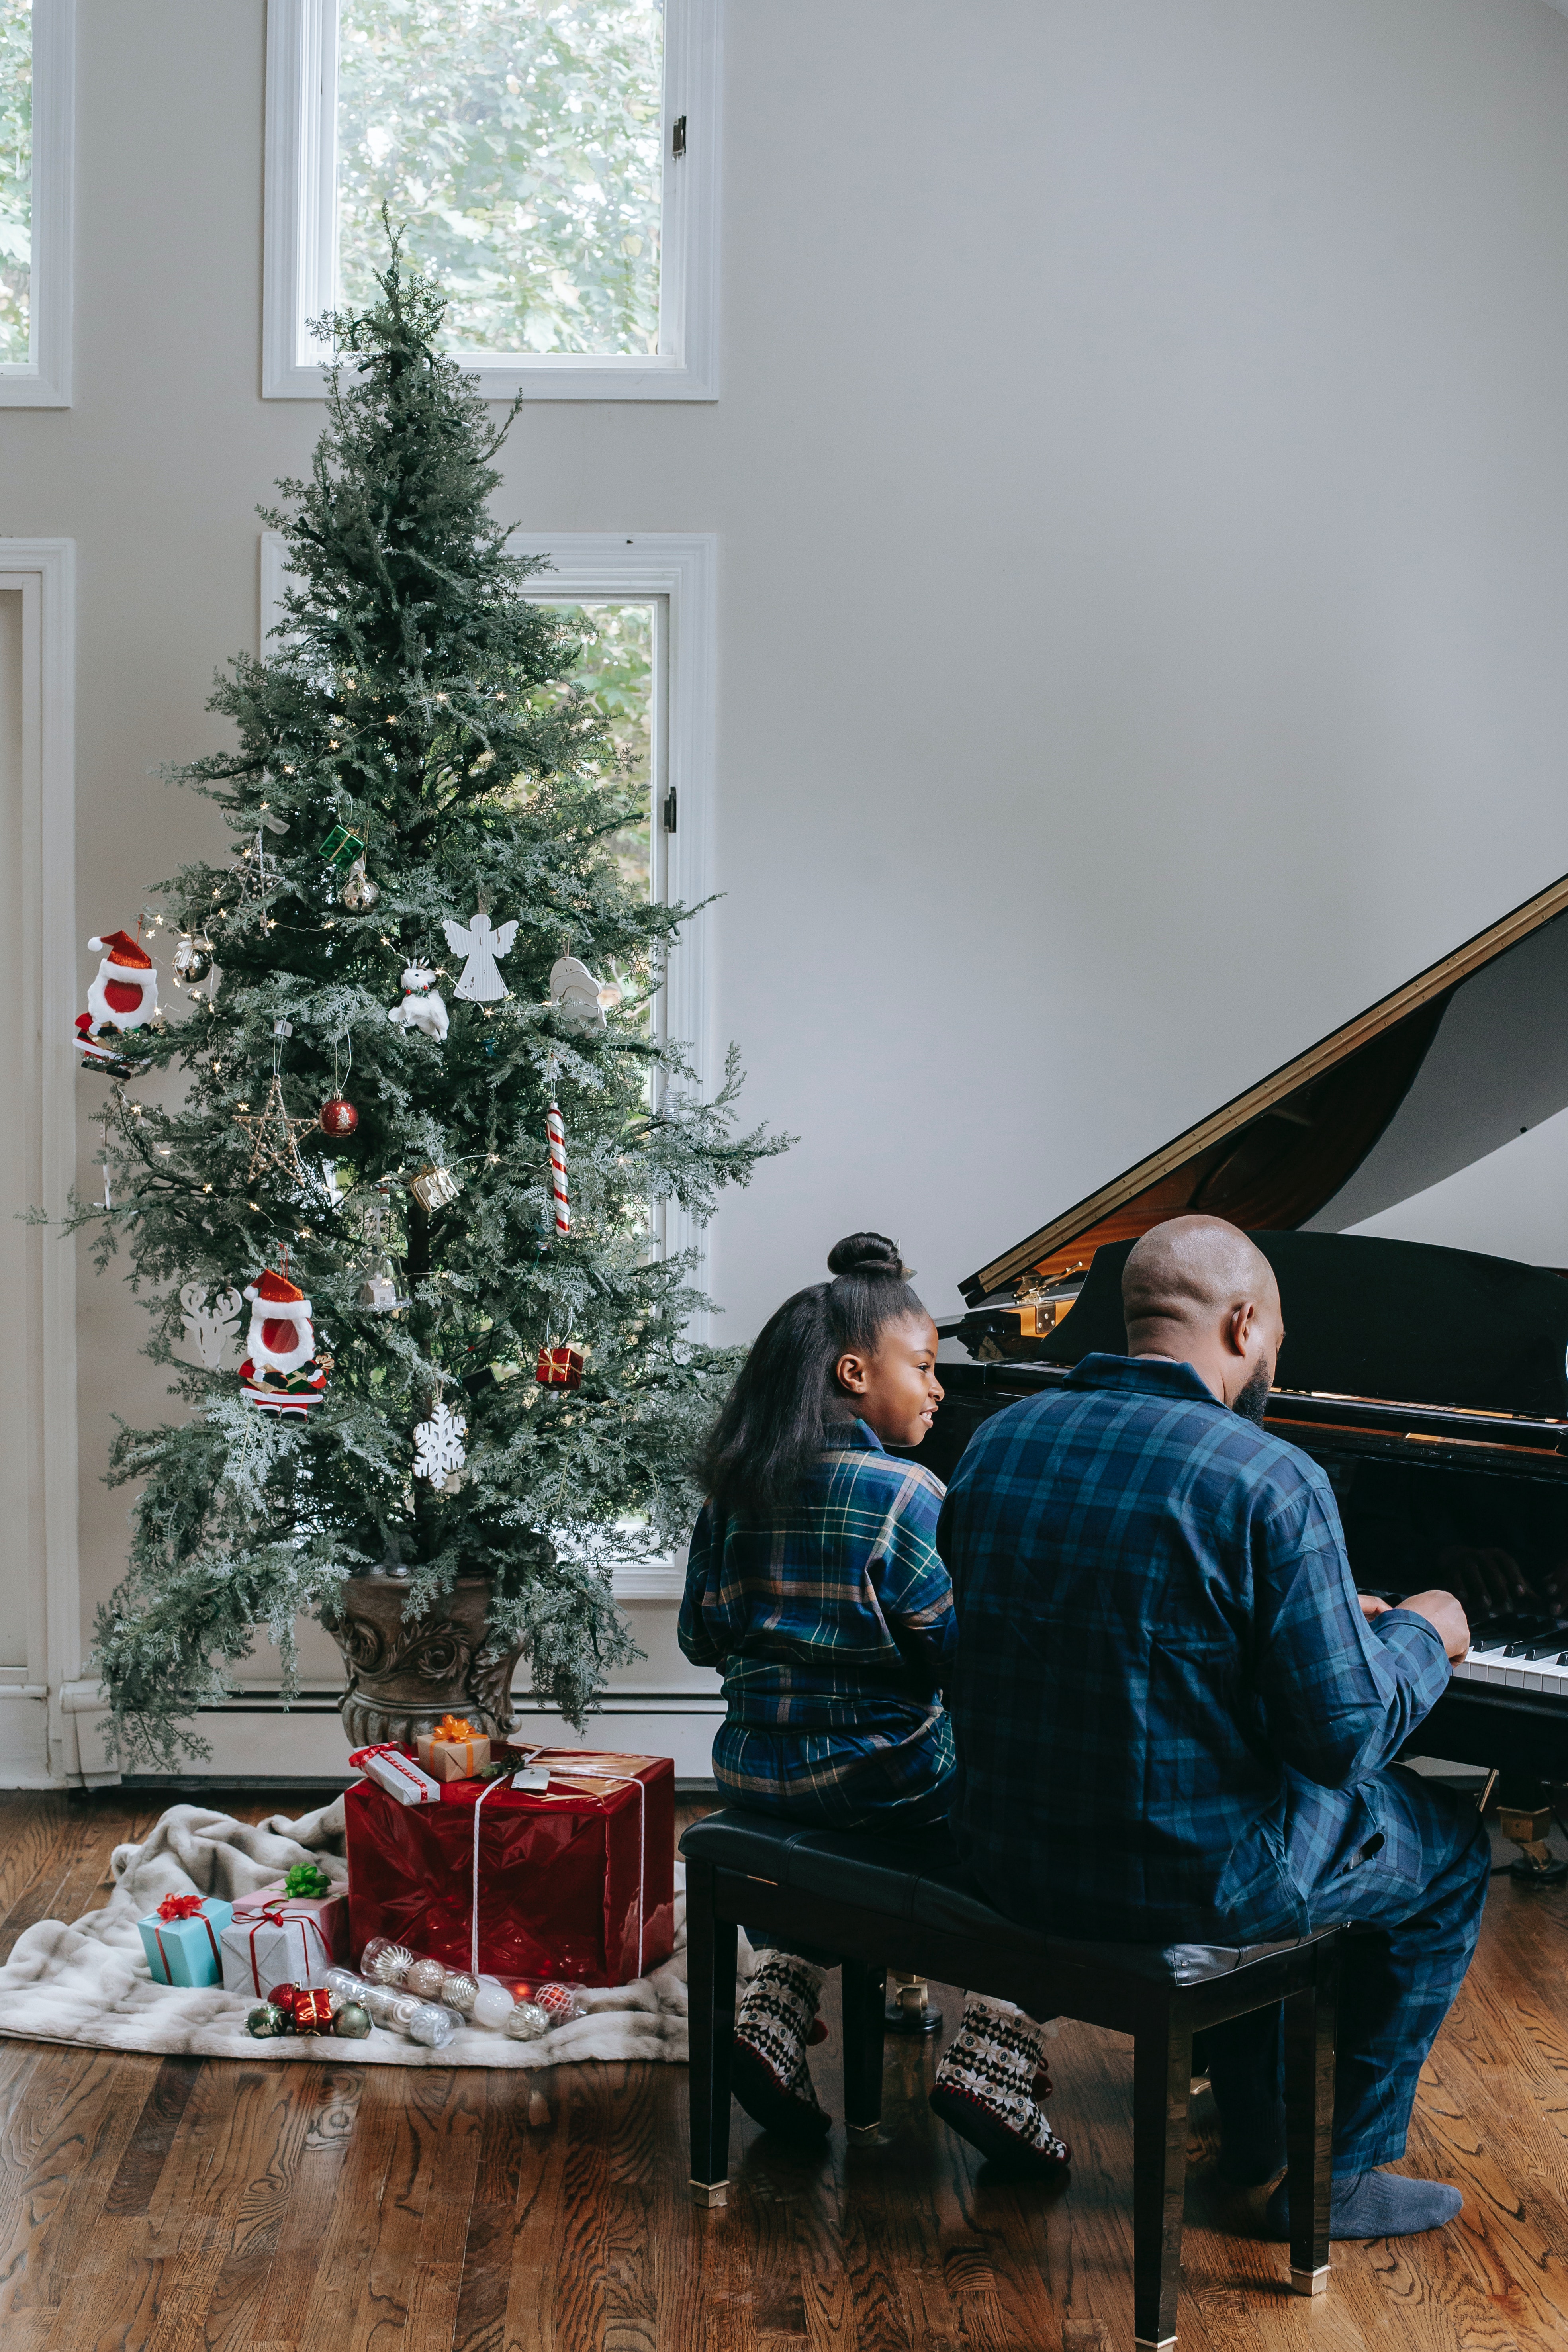 Photo by Any Lane: https://www.pexels.com/photo/a-father-and-her-child-playing-a-piano-near-a-christmas-tree-5728300/